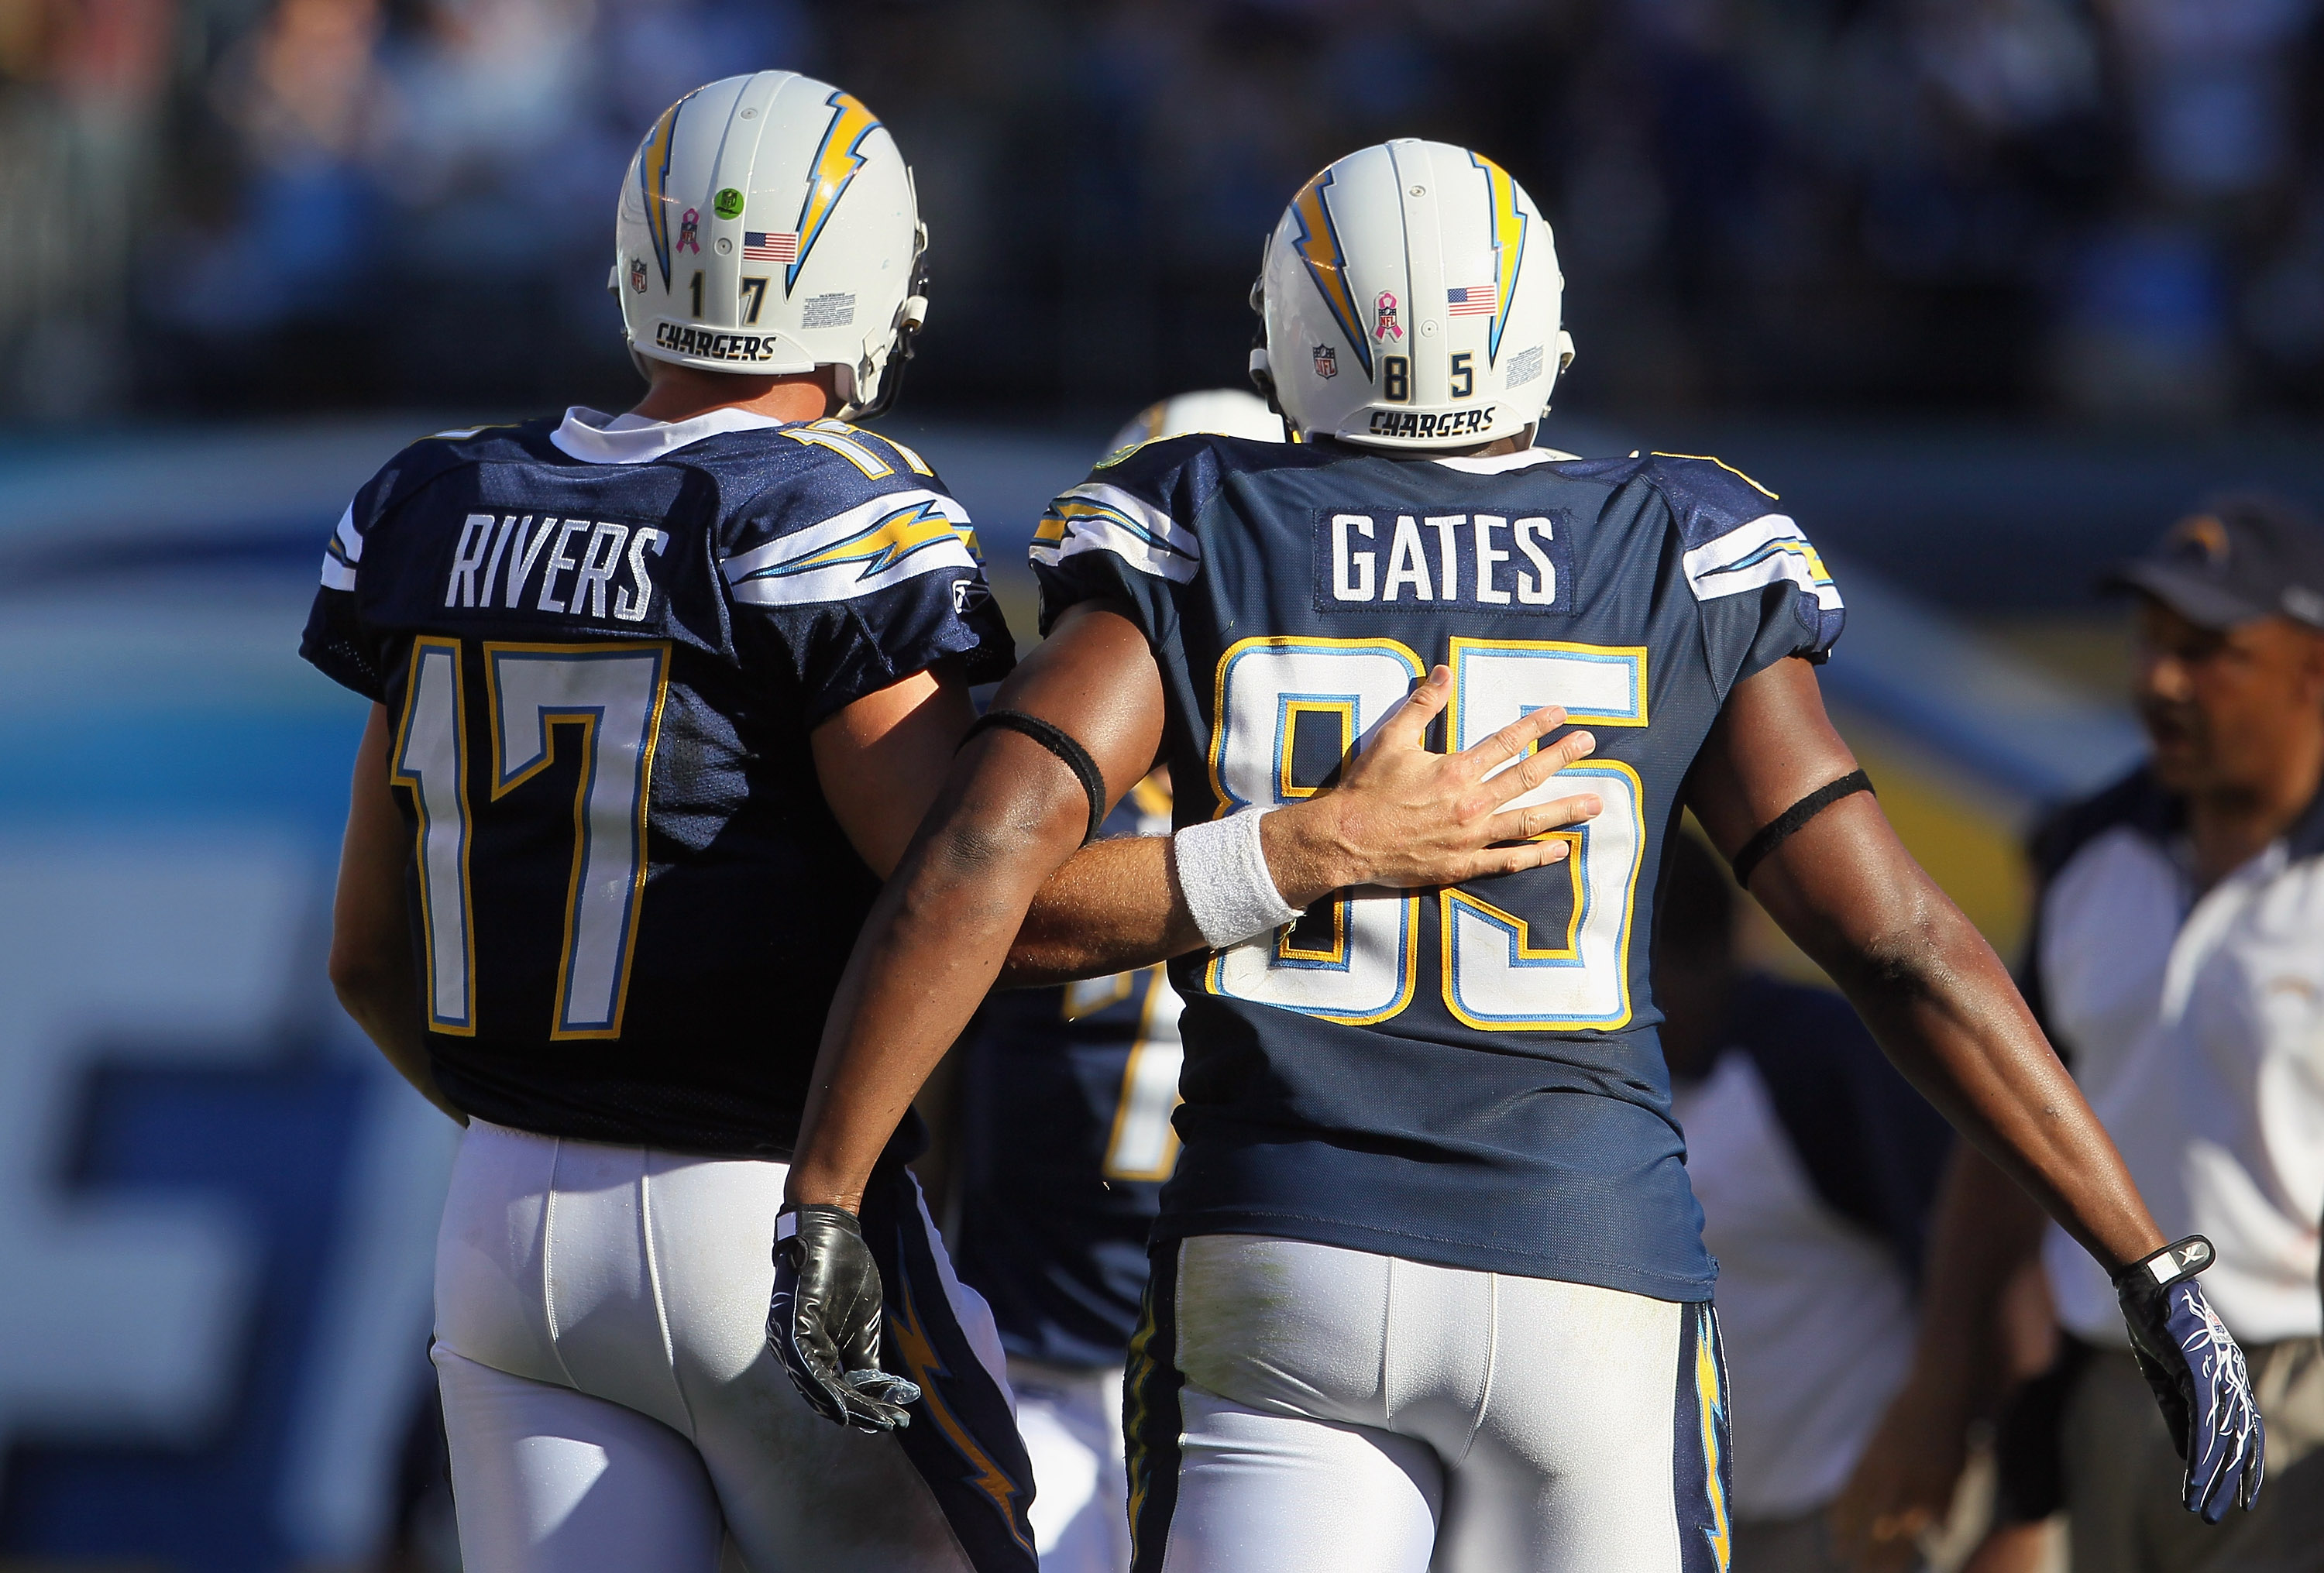 SAN DIEGO - OCTOBER 31:  Quarterback Philip Rivers #17 and tight end Antonio Gates #85 of the San Diego Chargers walk up the sideline together against the Tennessee Titans in the fourth quarter at Qualcomm Stadium on October 31, 2010 in San Diego, Califor